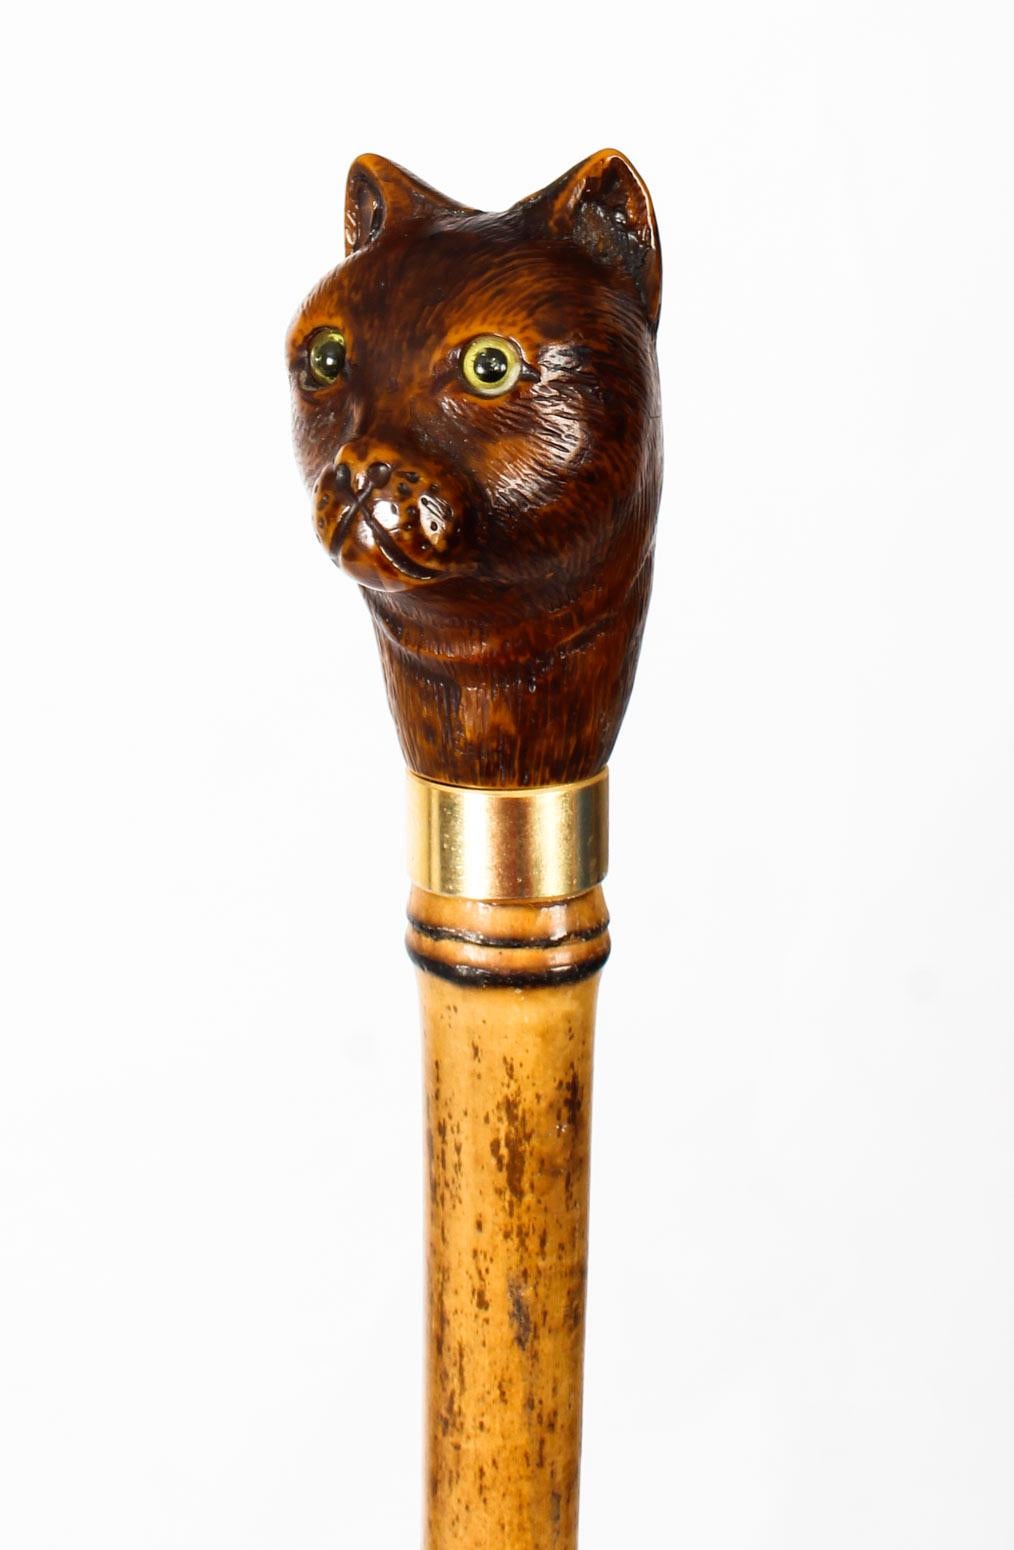 This is an exquisite antique novelty decorative walking cane, with a superbly carved cat's head handle, dating from the late 19th century.

The wonderful handle has finely carved details and features two lovely glass eyes. 
 
It has an elegant